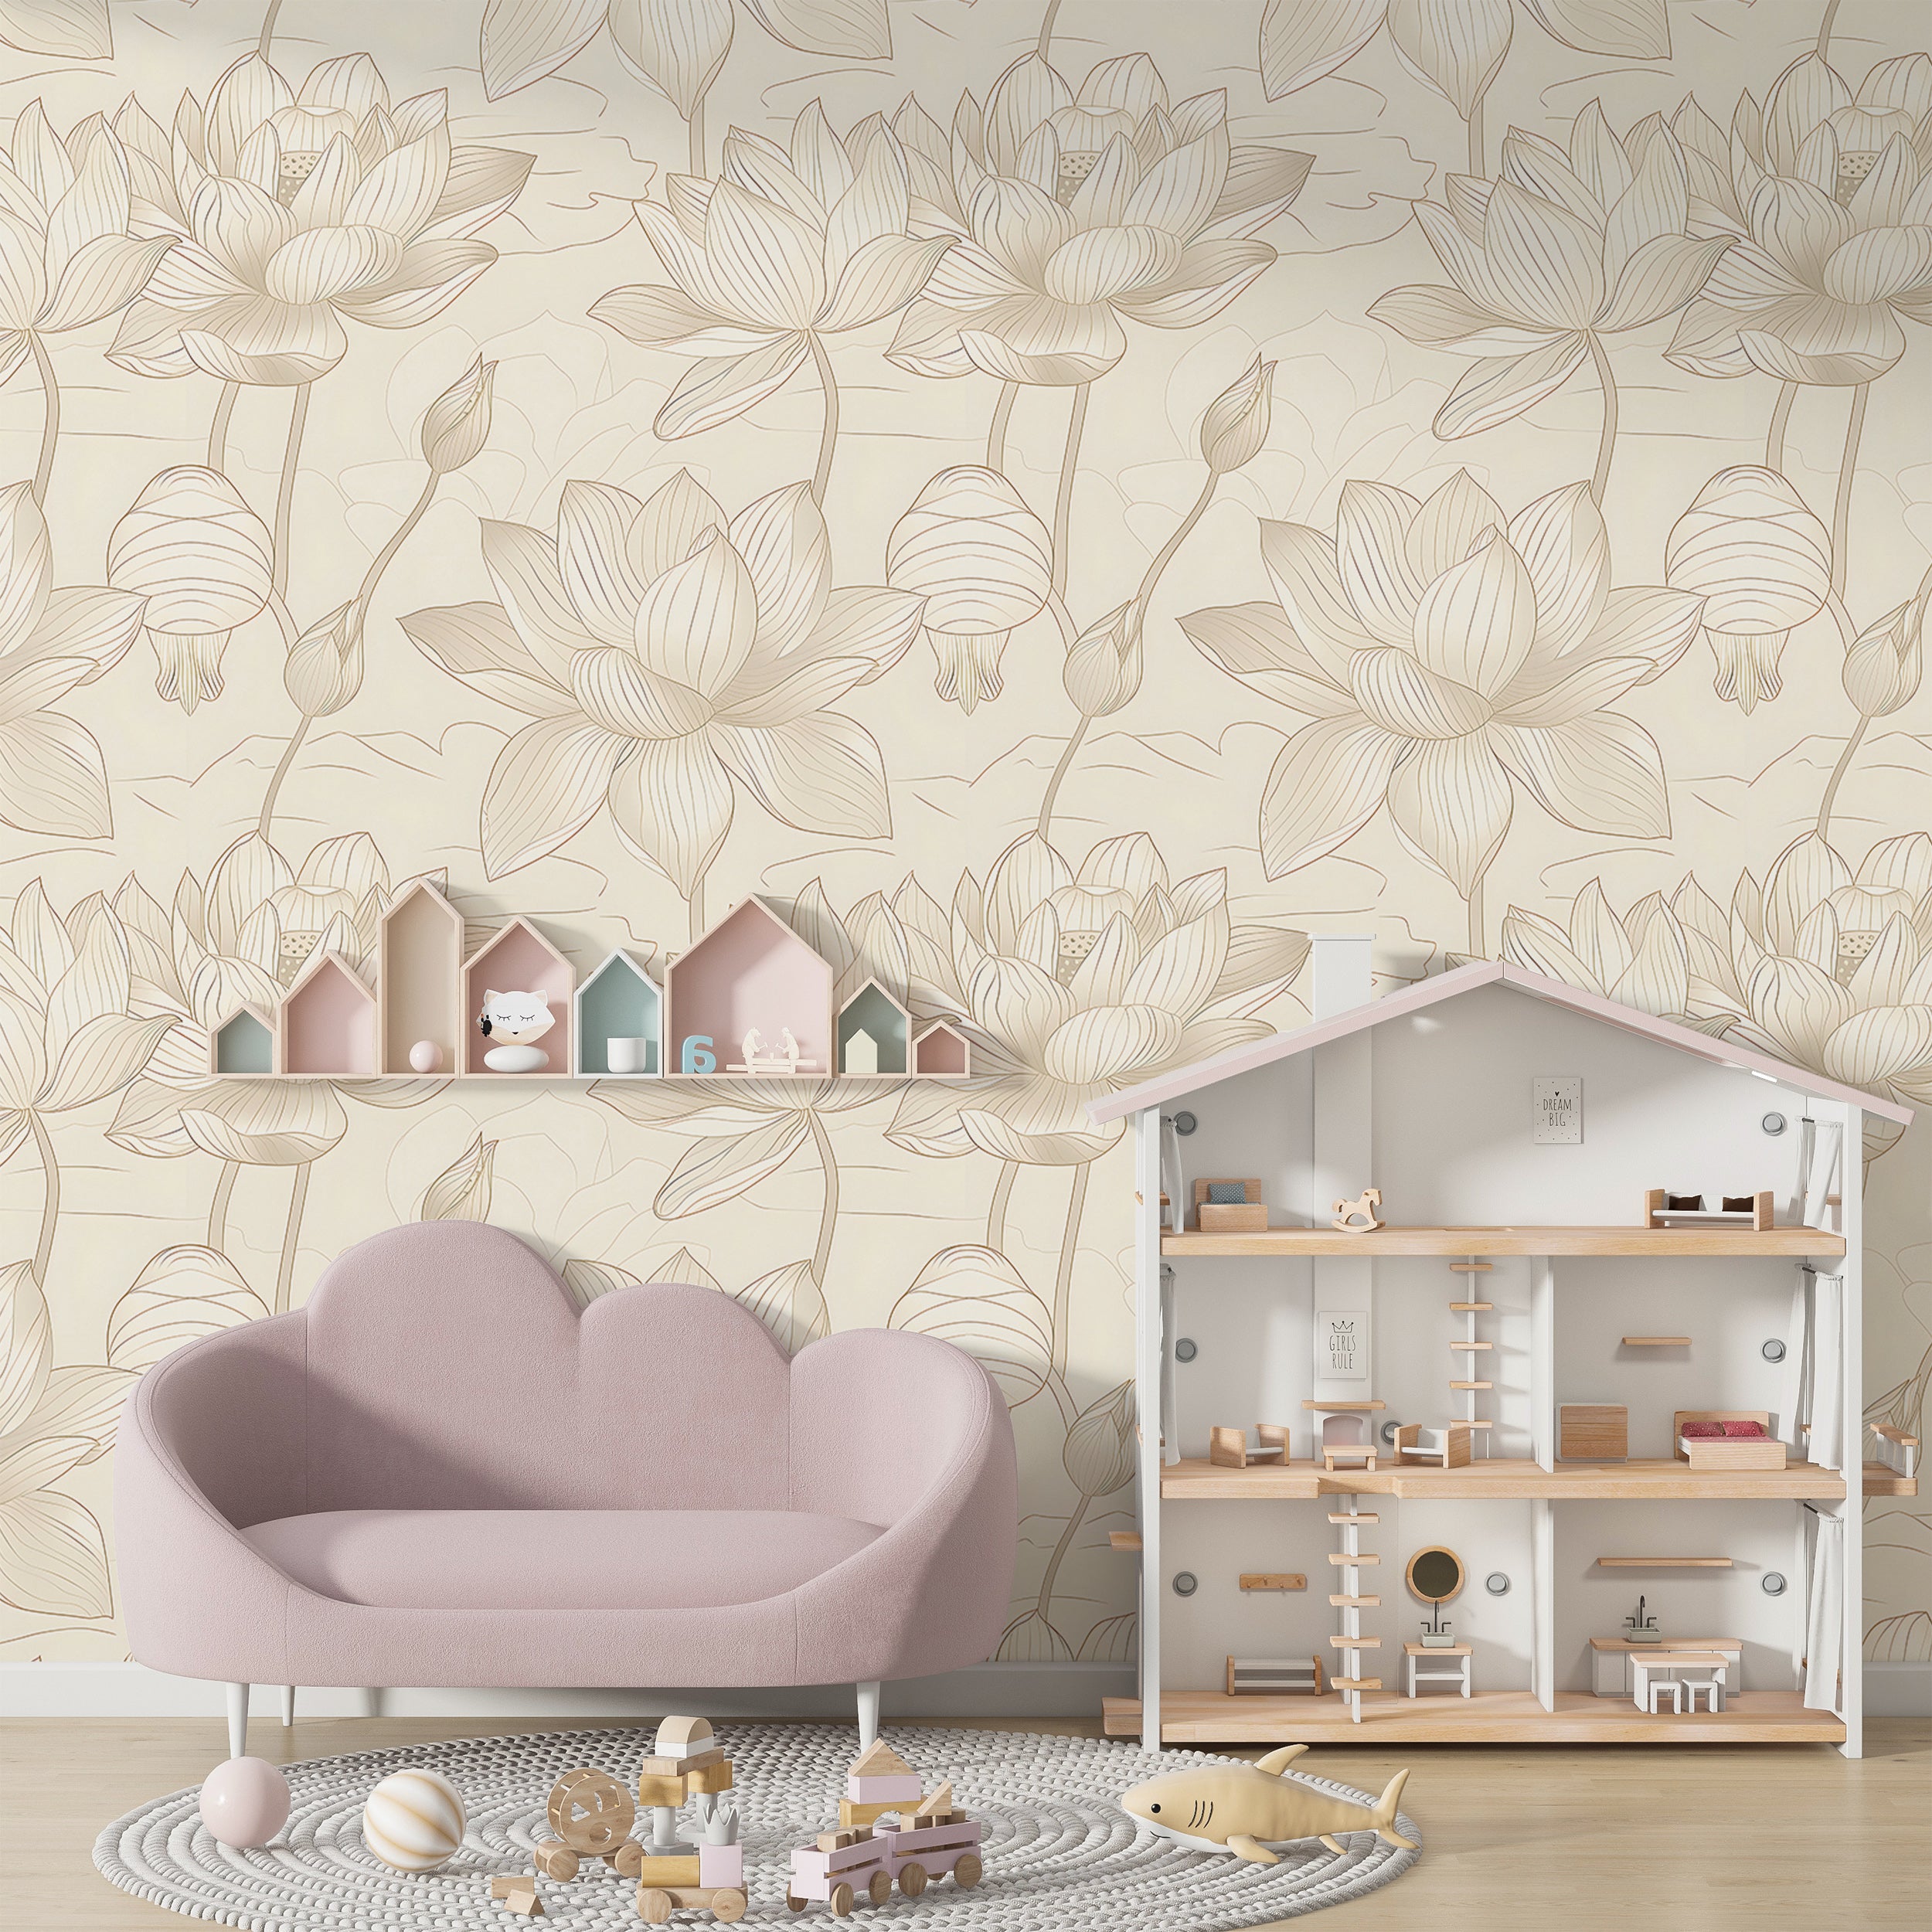 Beige Minimalistic Lotus Wallpaper, Peel and Stick Floral Wall Decal, Light Beige Lotus Pattern Wallpaper, Removable Botanical PVC-free Decor